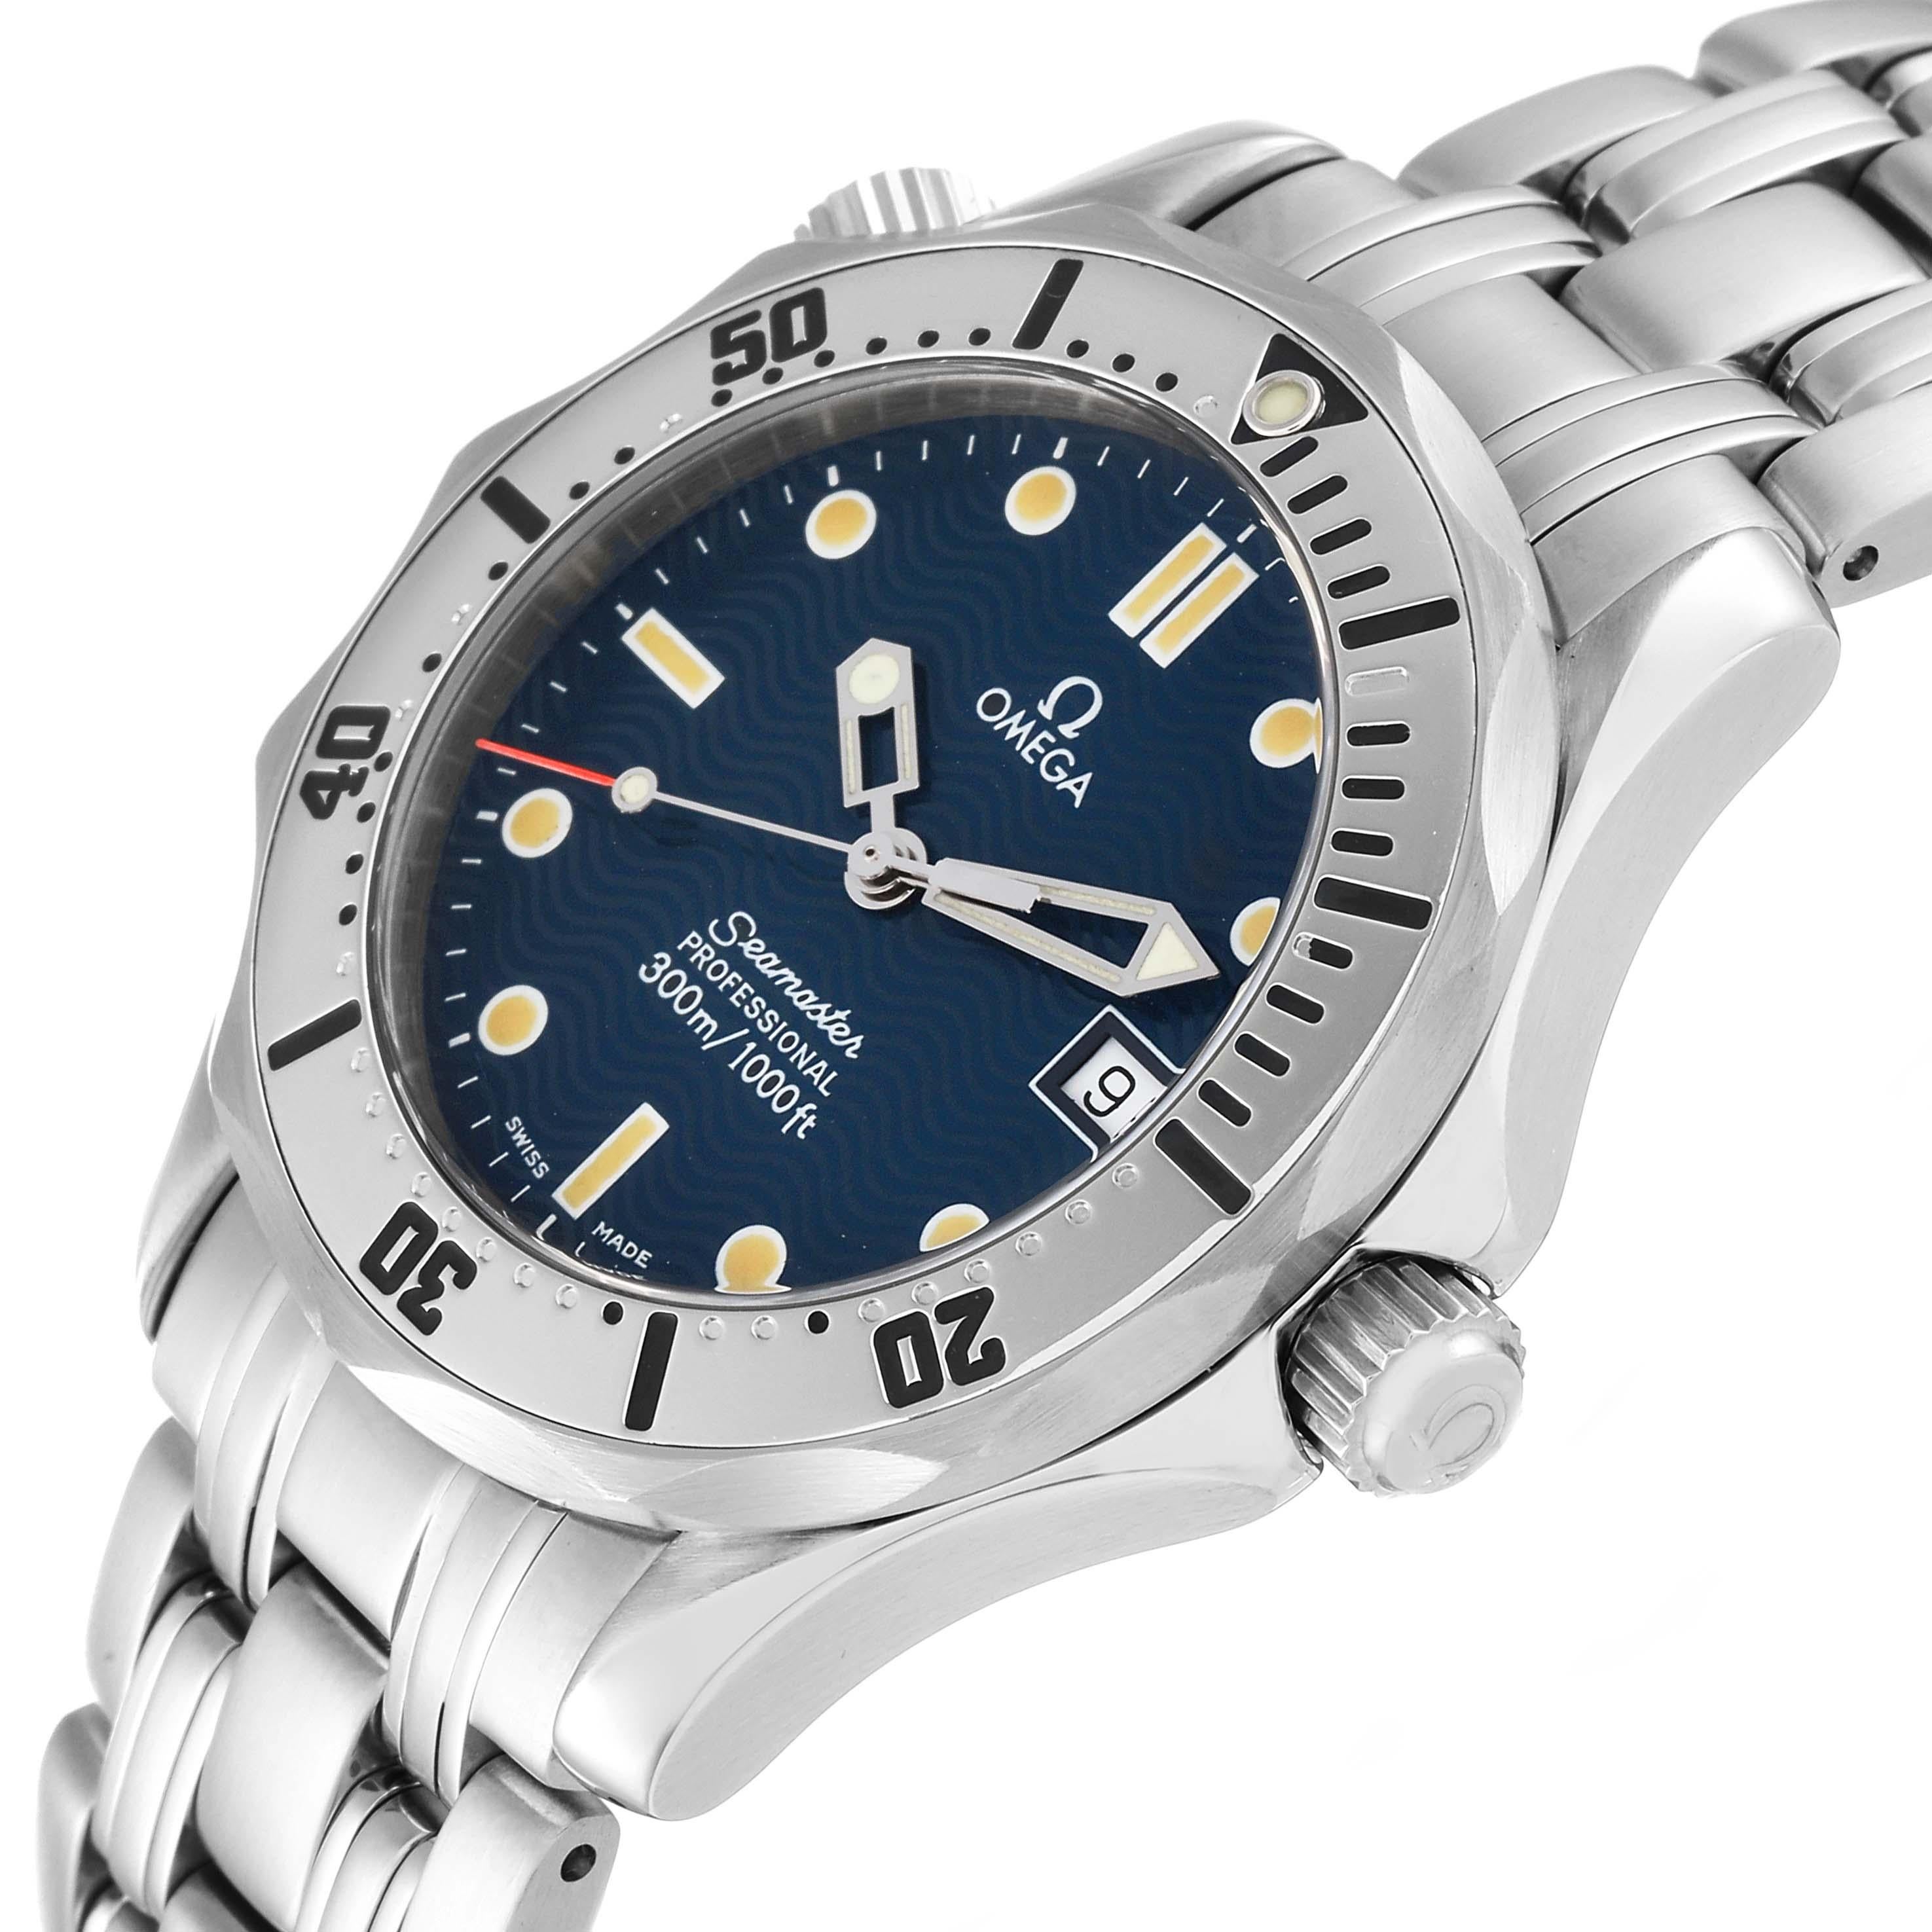 Omega Seamaster 300m Midsize 36mm Steel Mens Watch 2562.80.00 For Sale 1